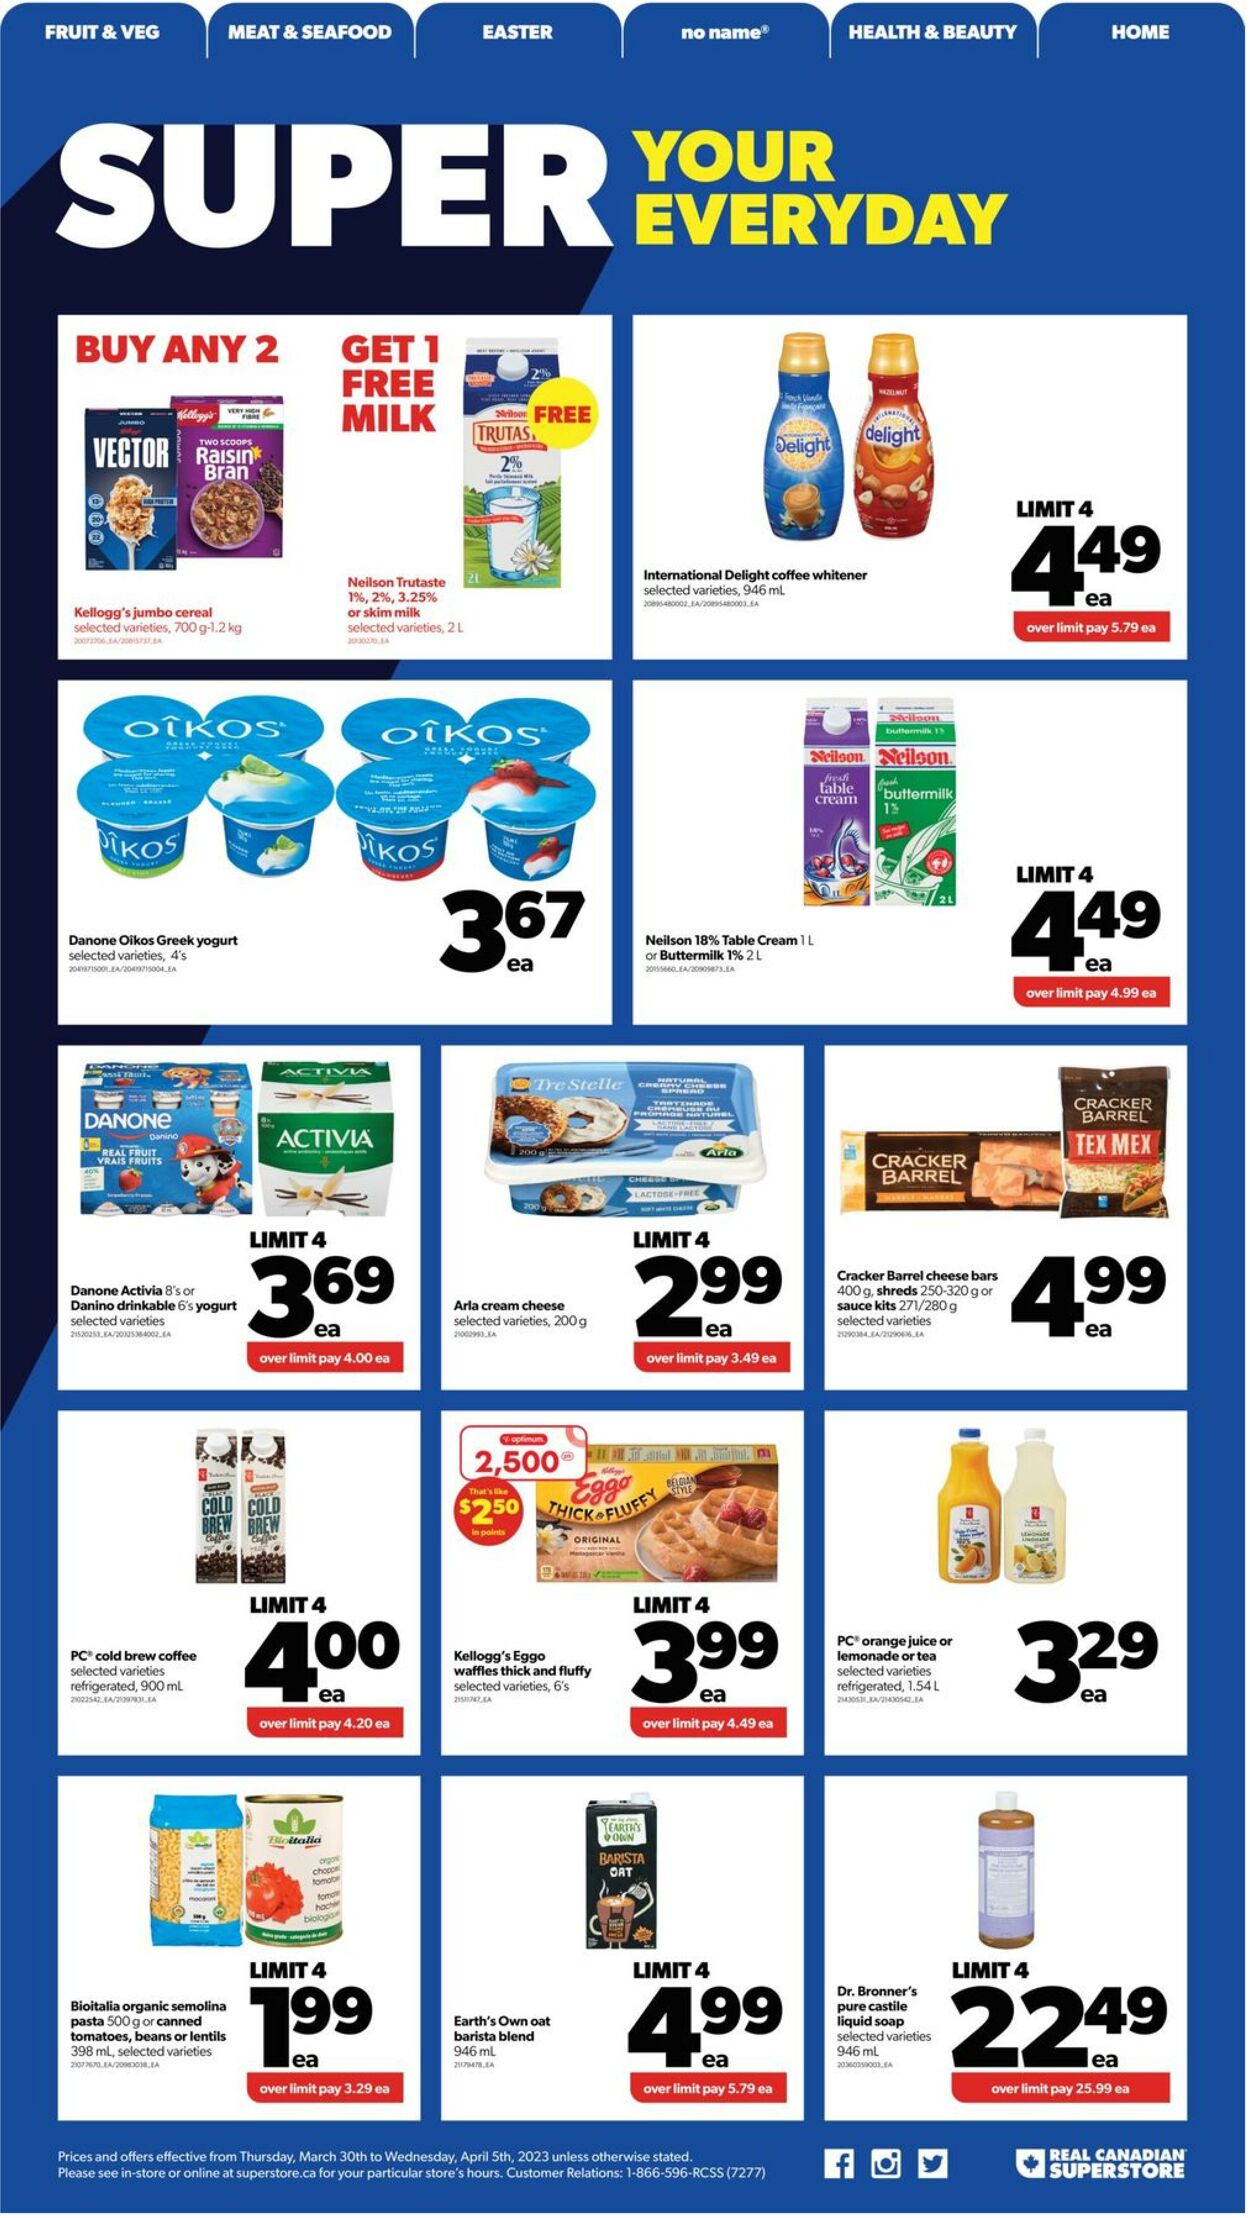 Flyer Real Canadian Superstore 30.03.2023 - 05.04.2023